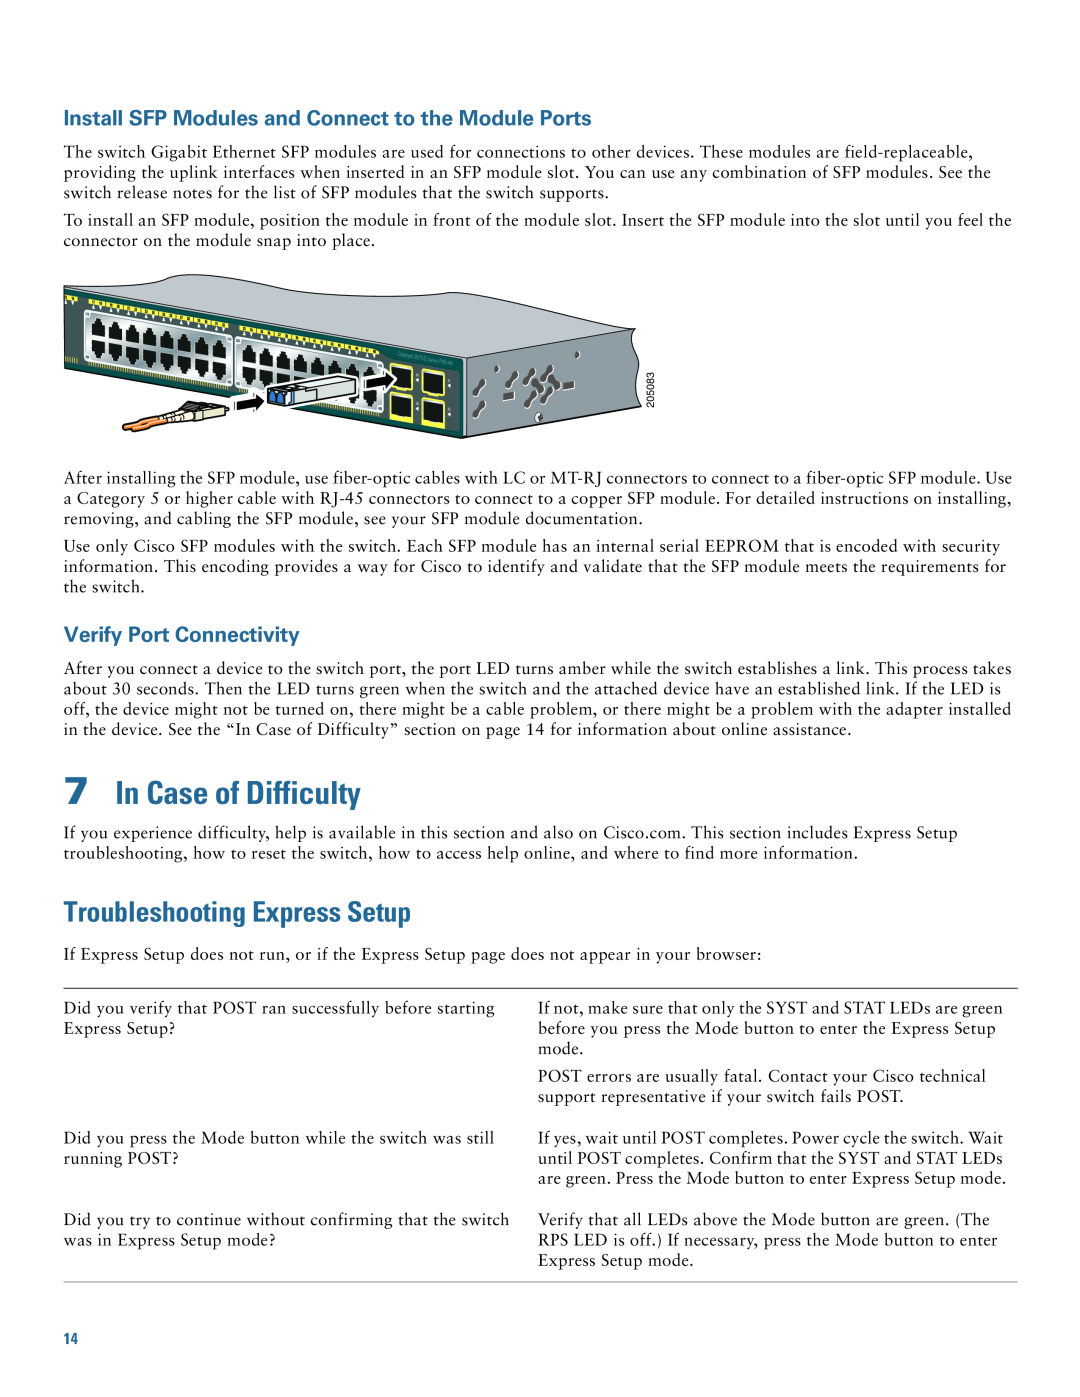 Cisco Systems 2975 manual In Case of Difficulty, Troubleshooting Express Setup, Verify Port Connectivity 